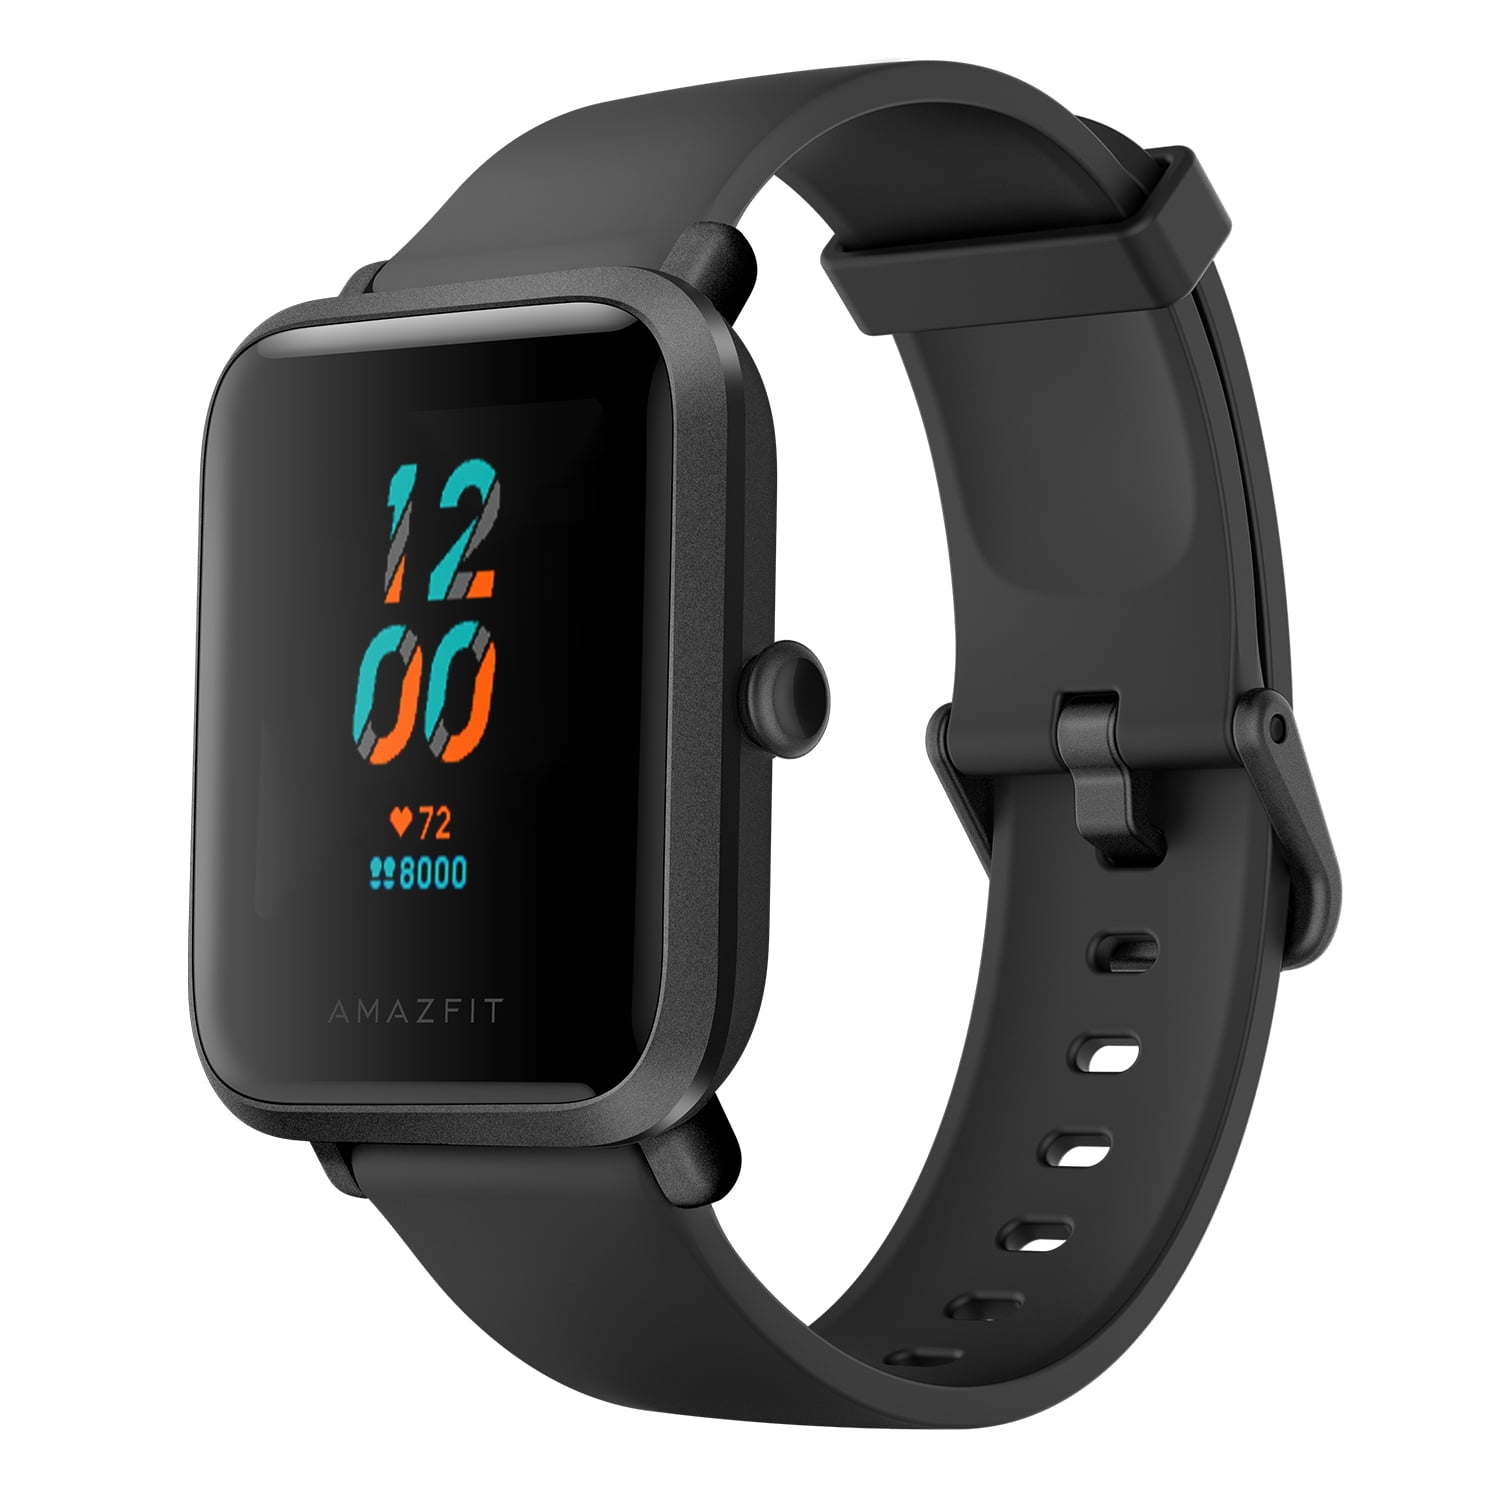 Amazfit Bip S Fitness Smart Watch: 40 Day Battery Life - 10 Sports Modes - Heart - 1.28'' Always-On Display - Water Resistant - GPS, Carbon Black - Walmart.com